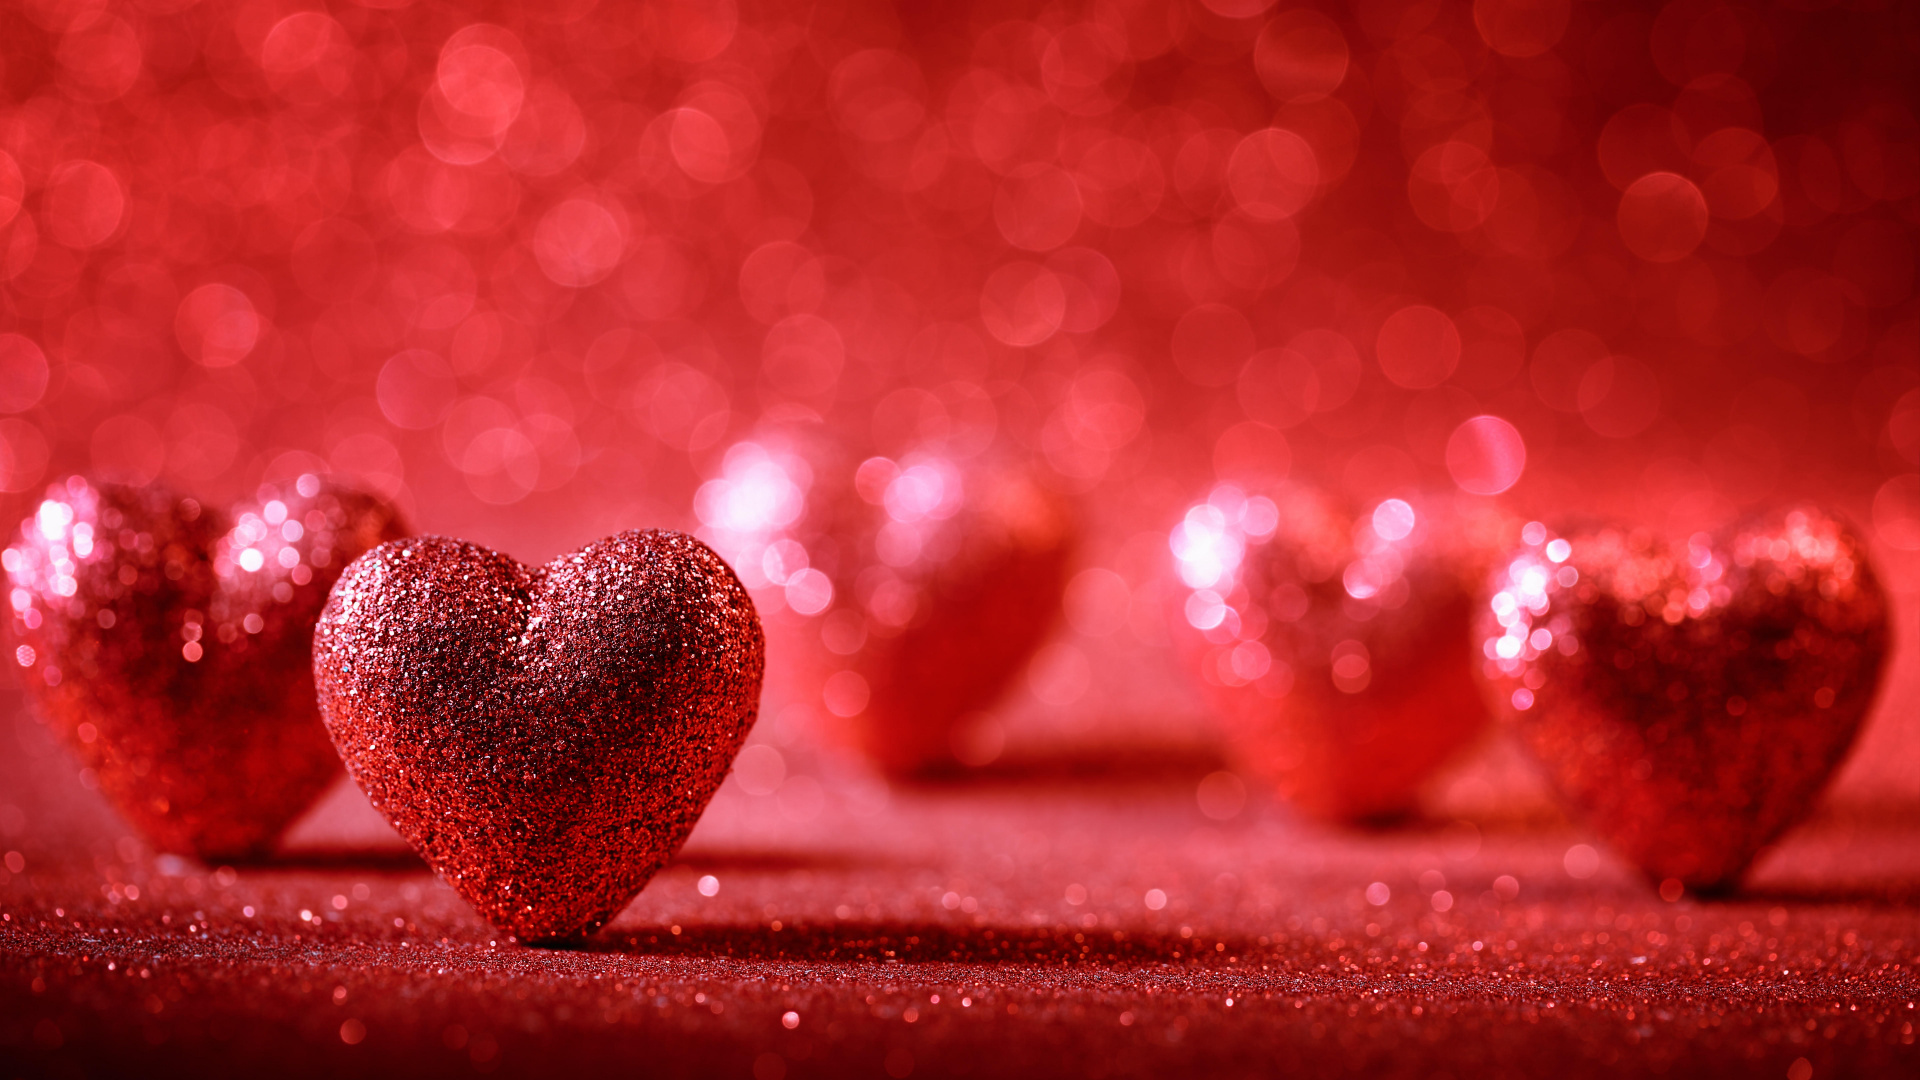 Valentines Day, Heart, Red, Love, Romance. Wallpaper in 1920x1080 Resolution